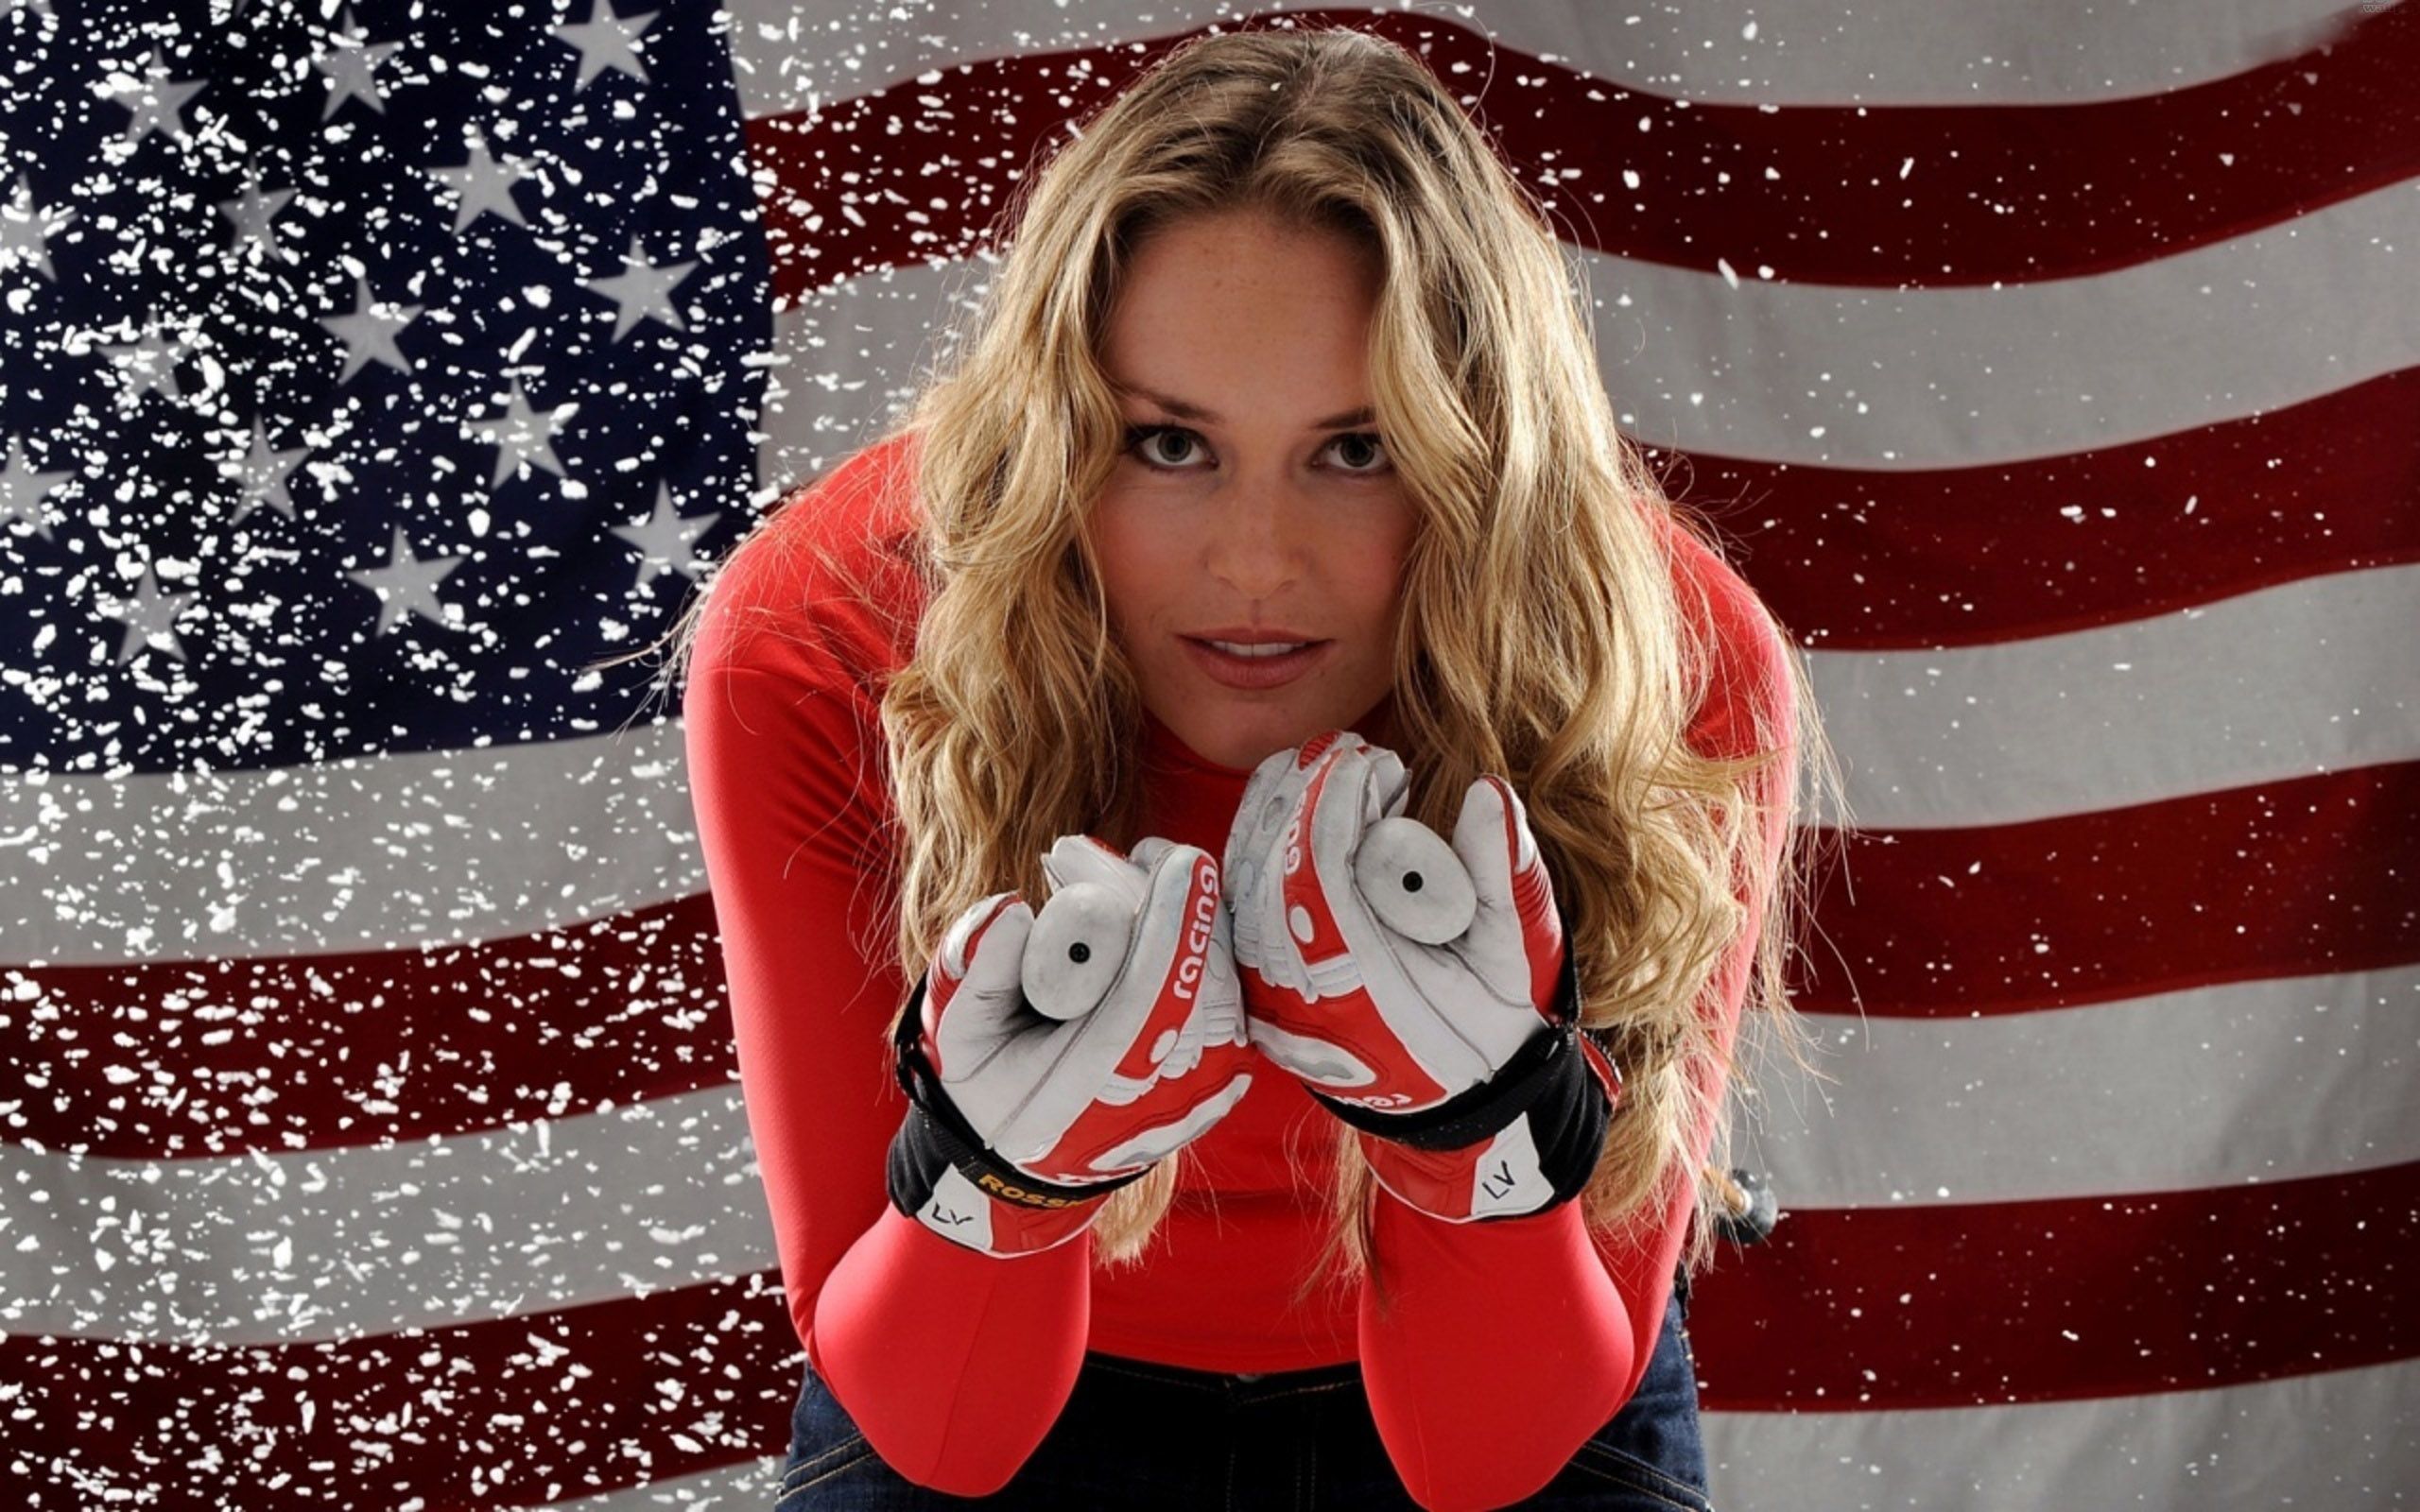 Lindsey Vonn Pictures - Wallpaper, High Definition, High Quality ...